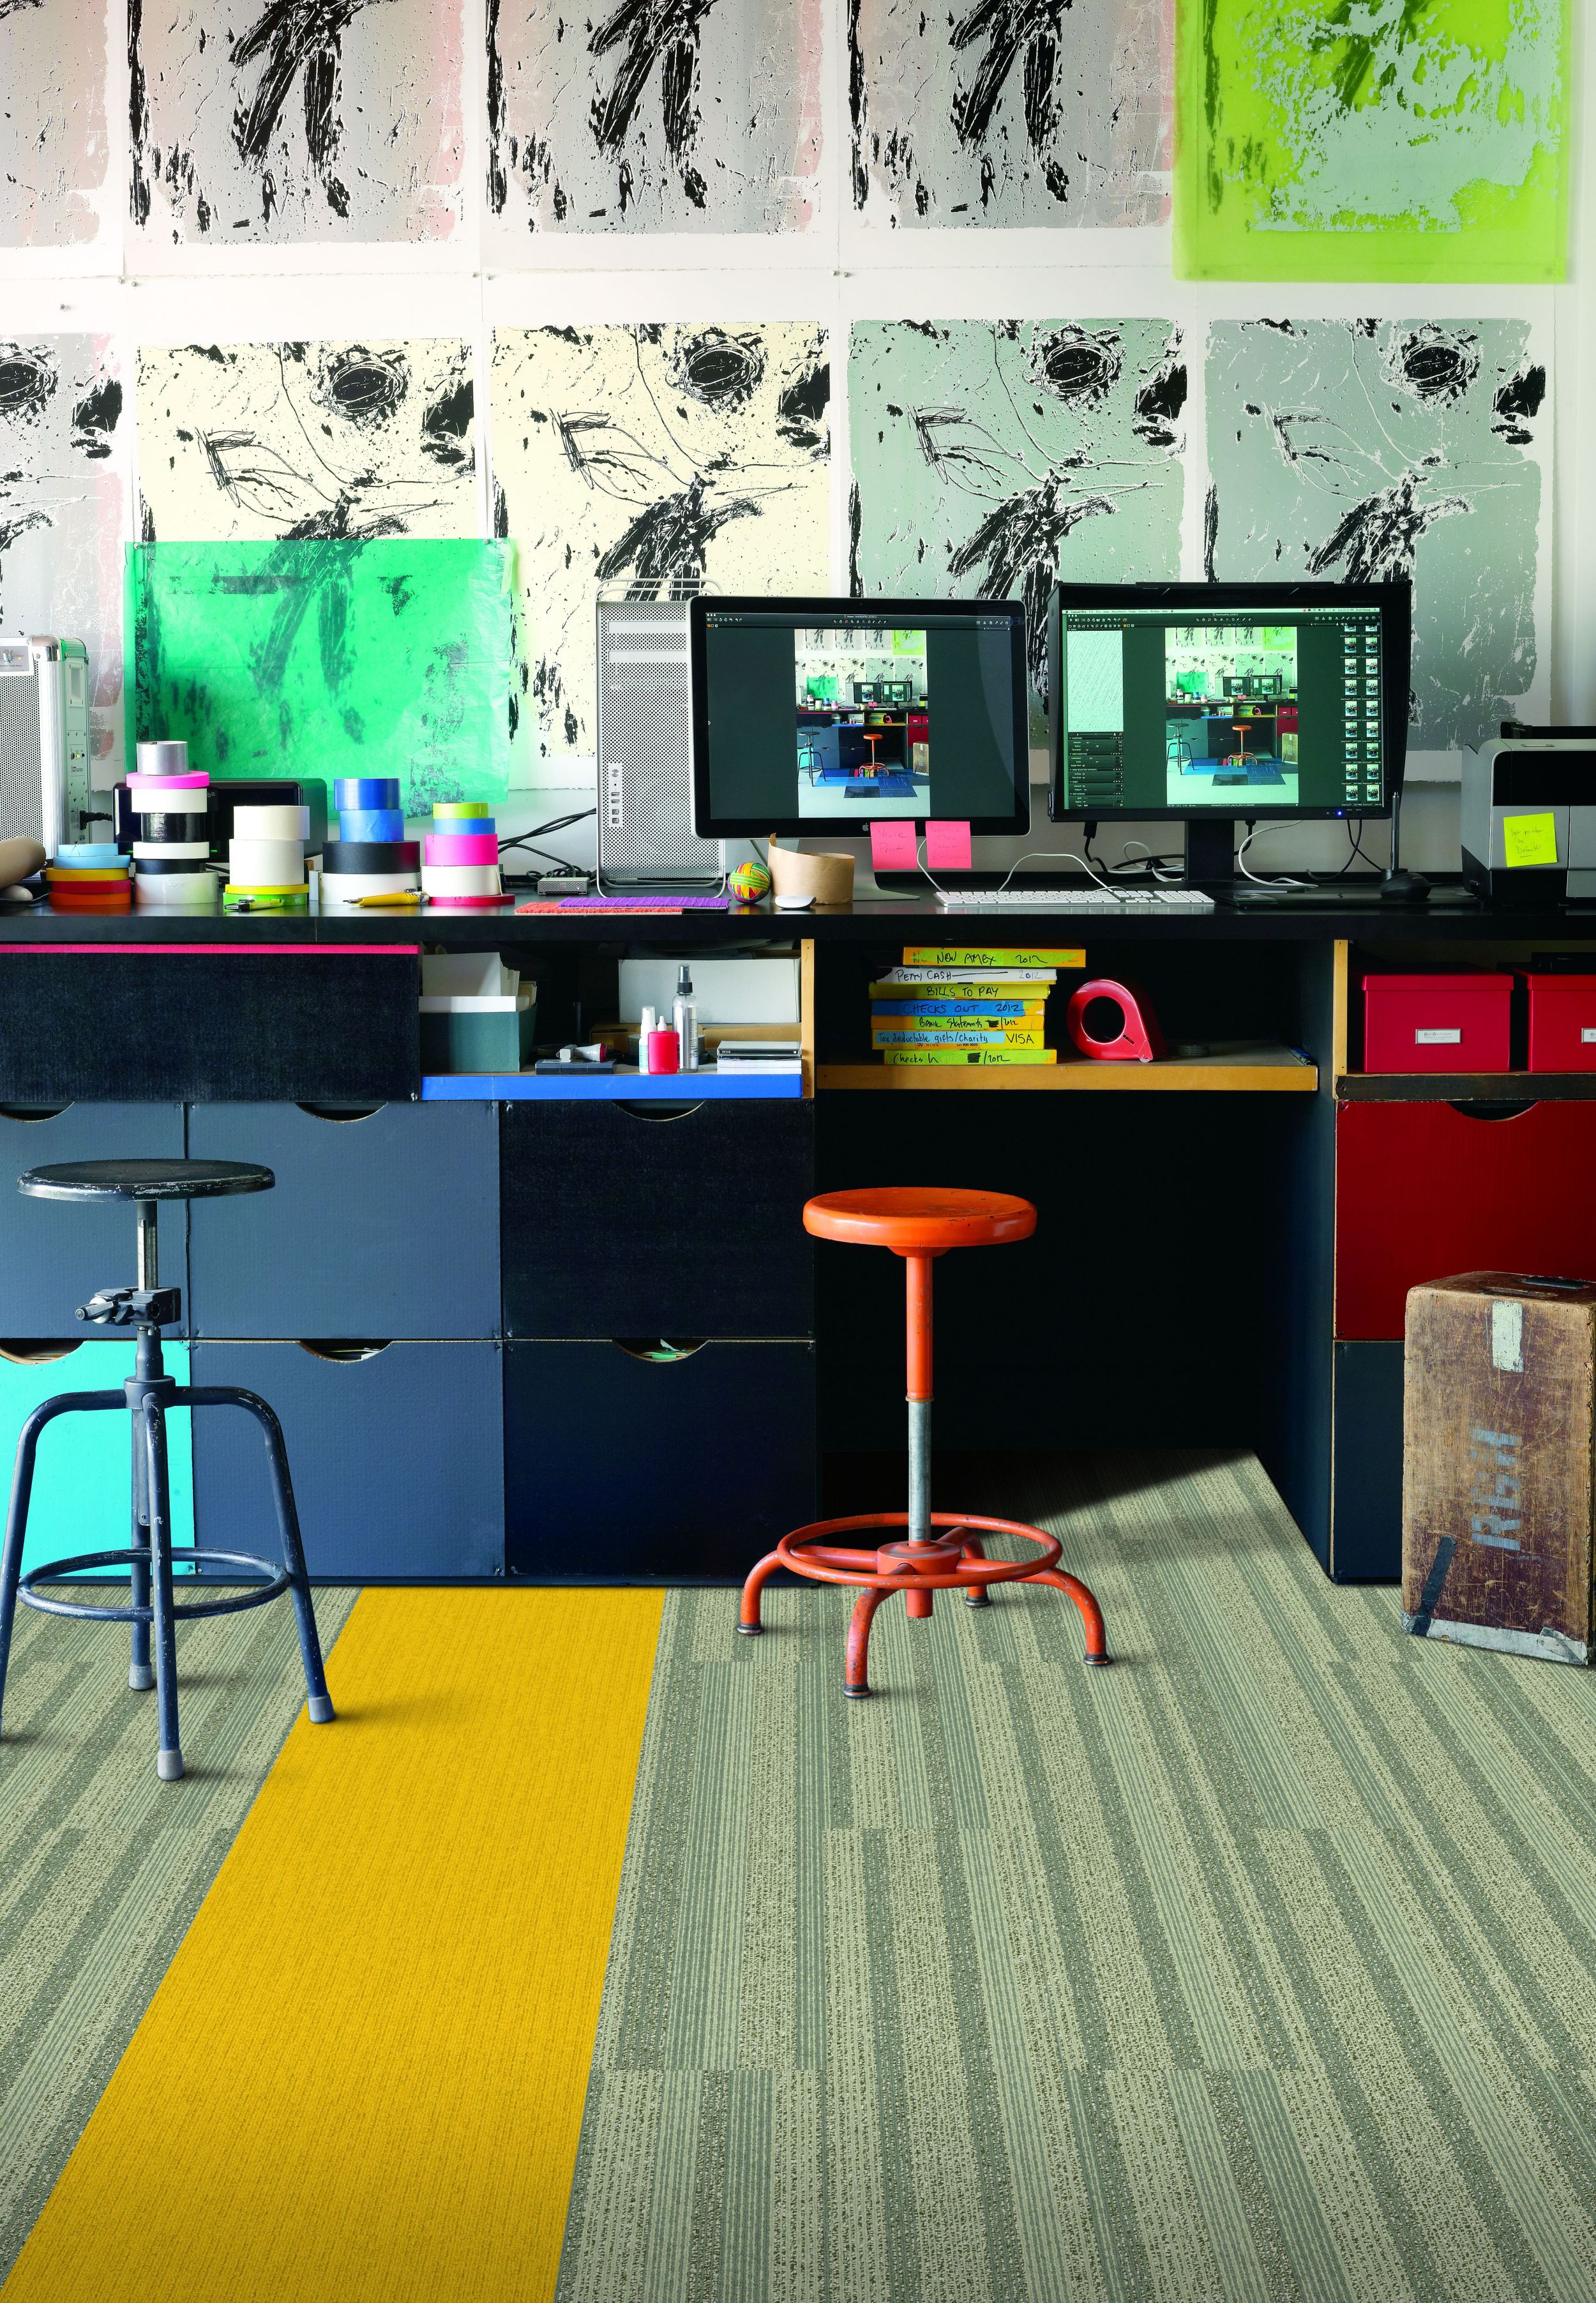 Interface SS217 and Viva Colores carpet tile in a colorful workspace imagen número 6